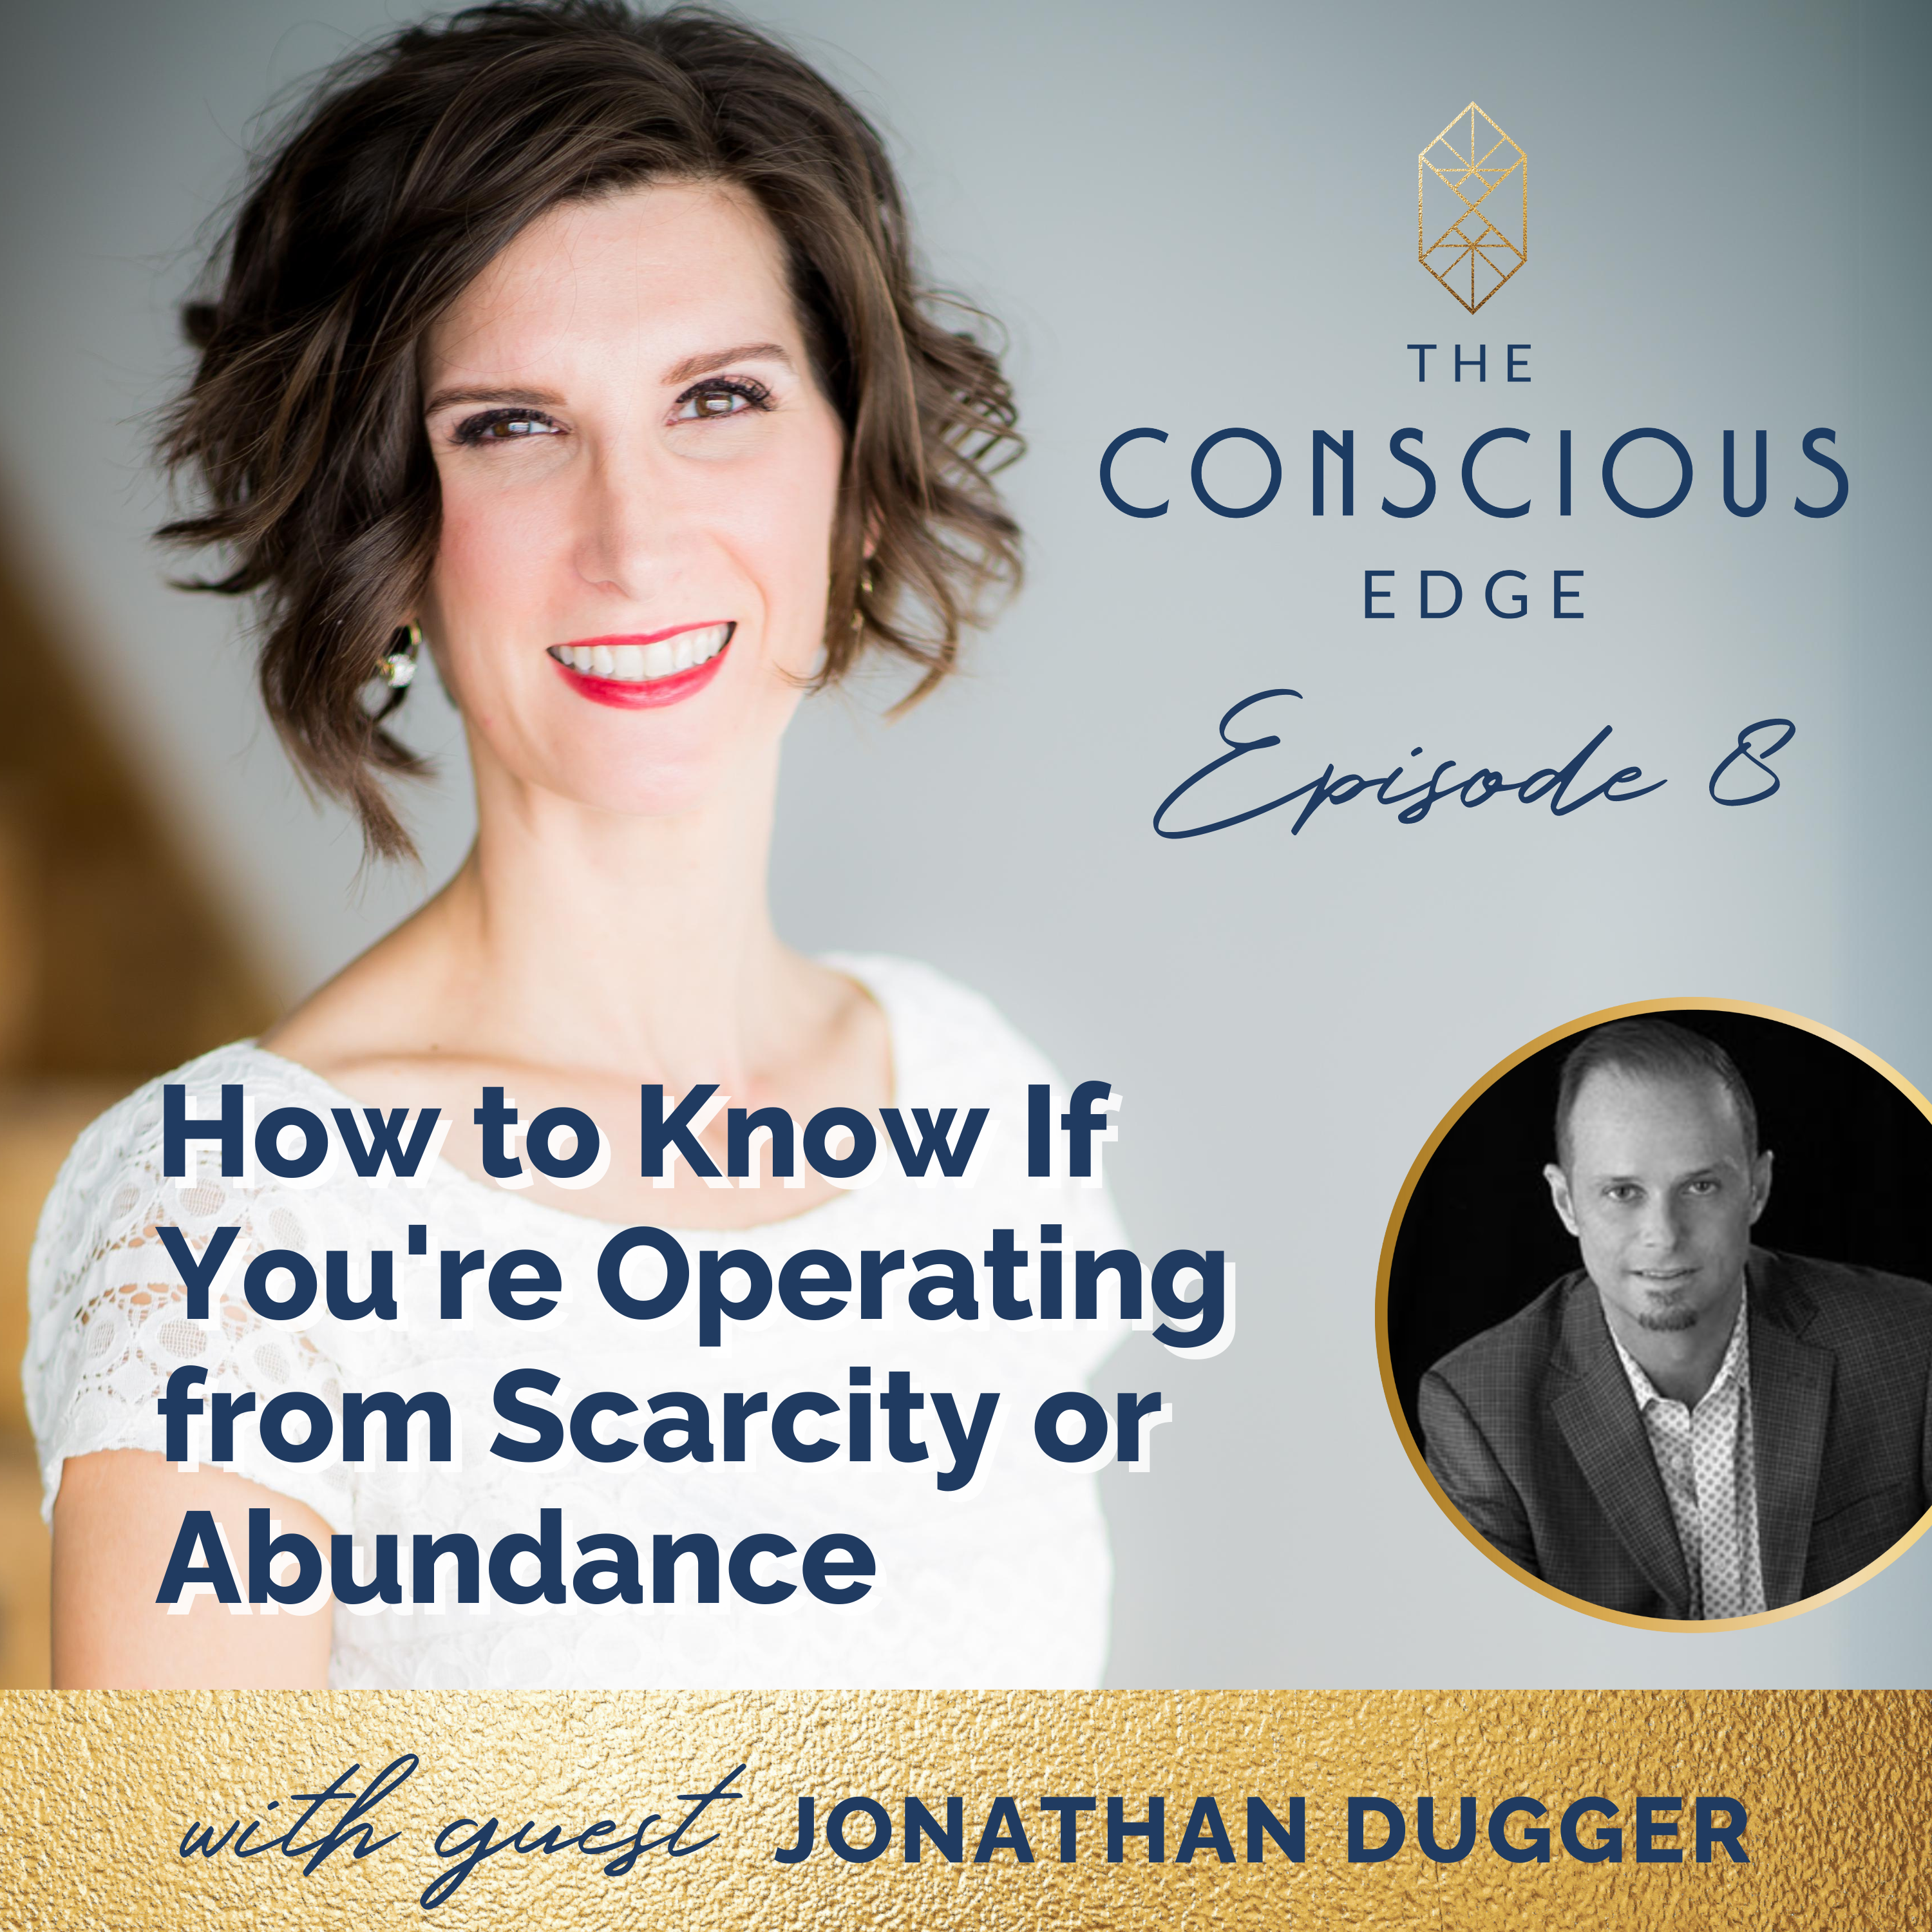 How to Know if You’re Operating From Scarcity or Abundance